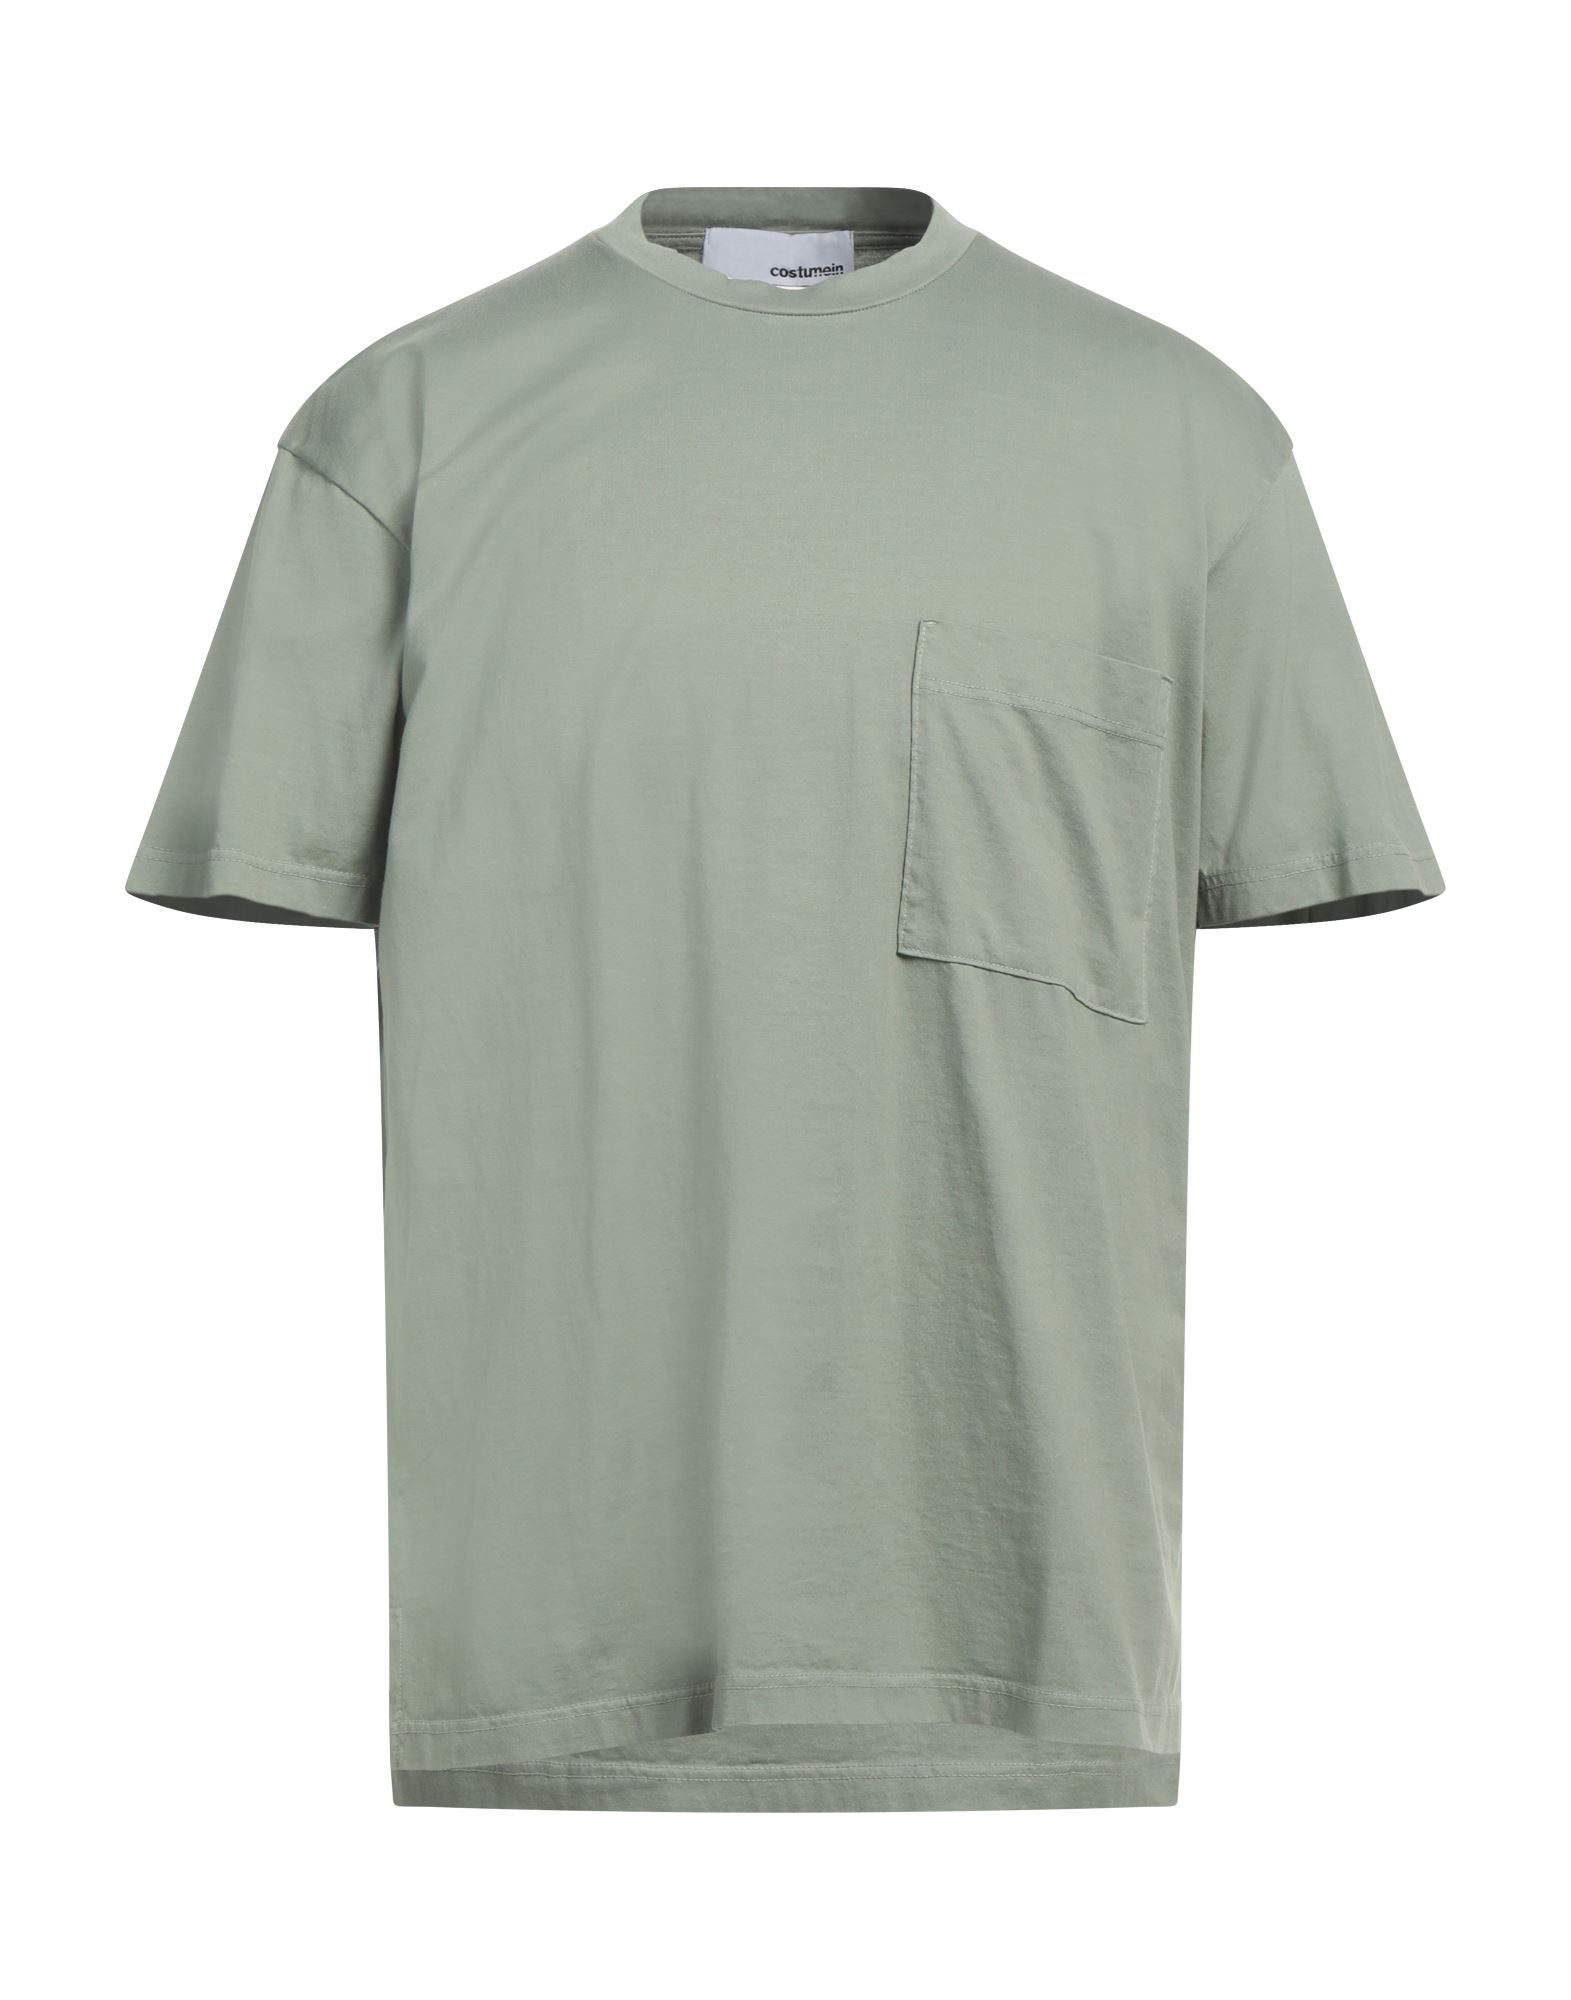 Costumein Man T-shirt Military Green Size L Cotton